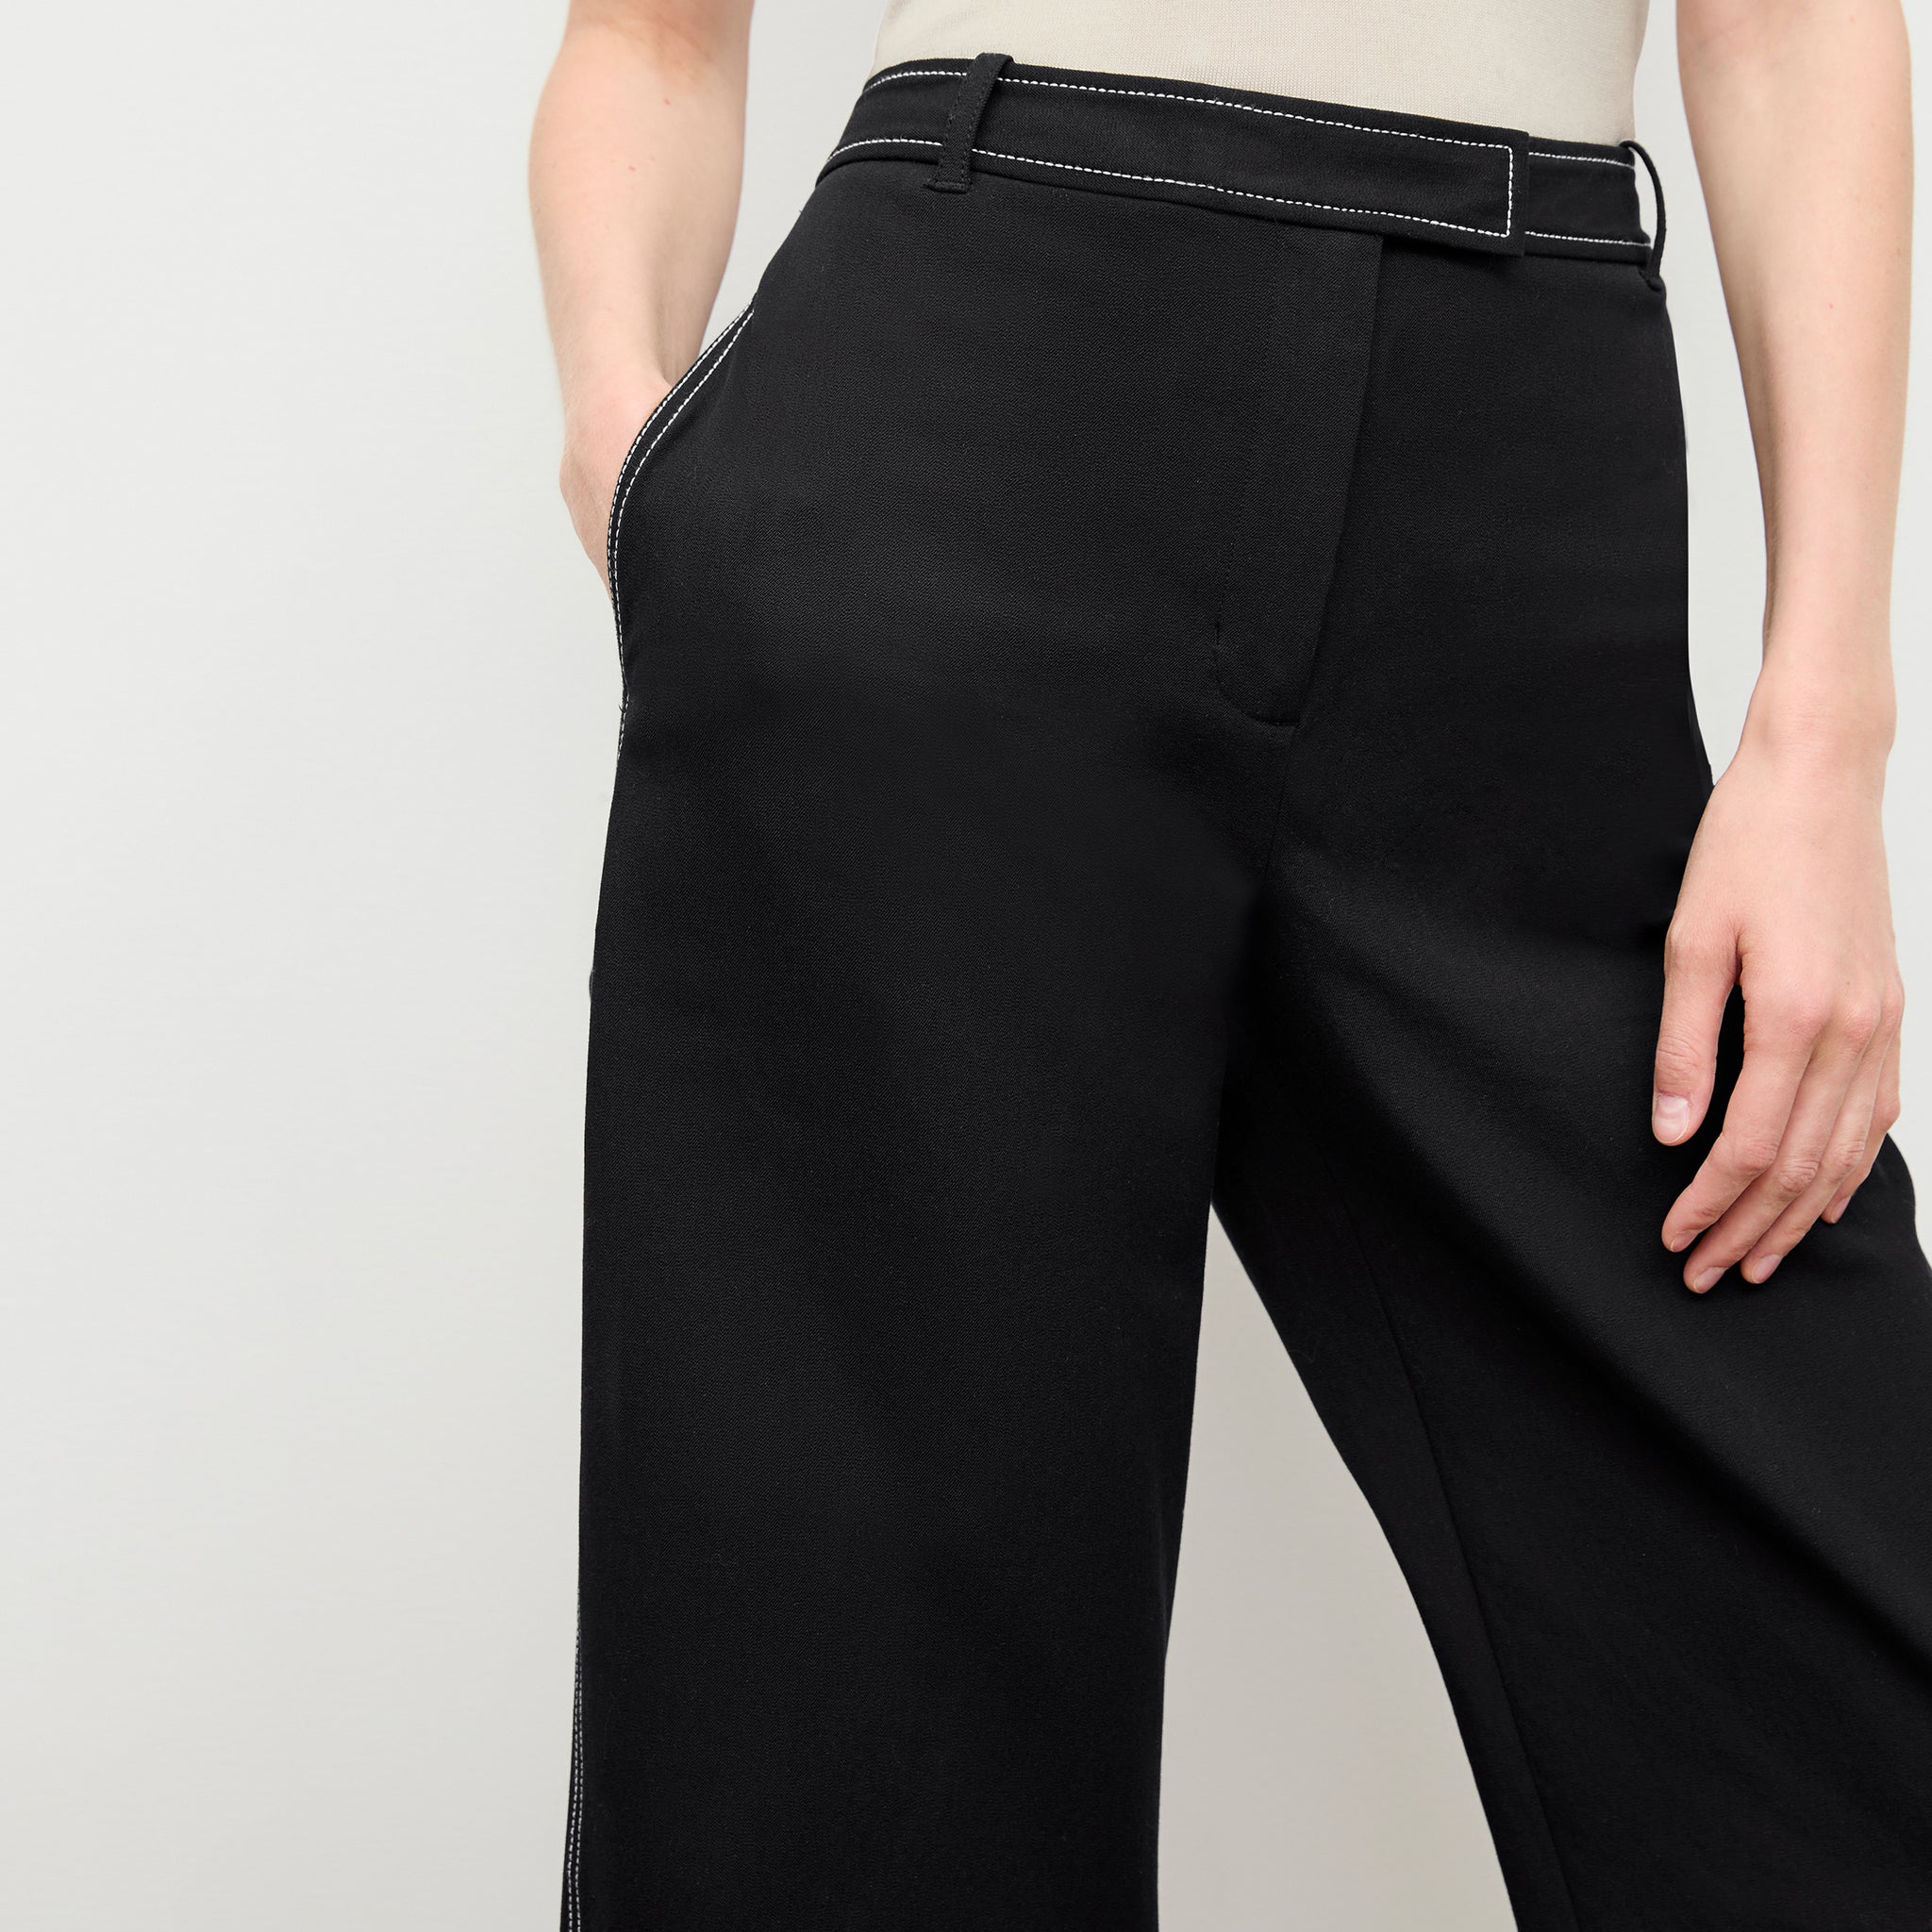 detail image of a woman wearing the abby pant in black